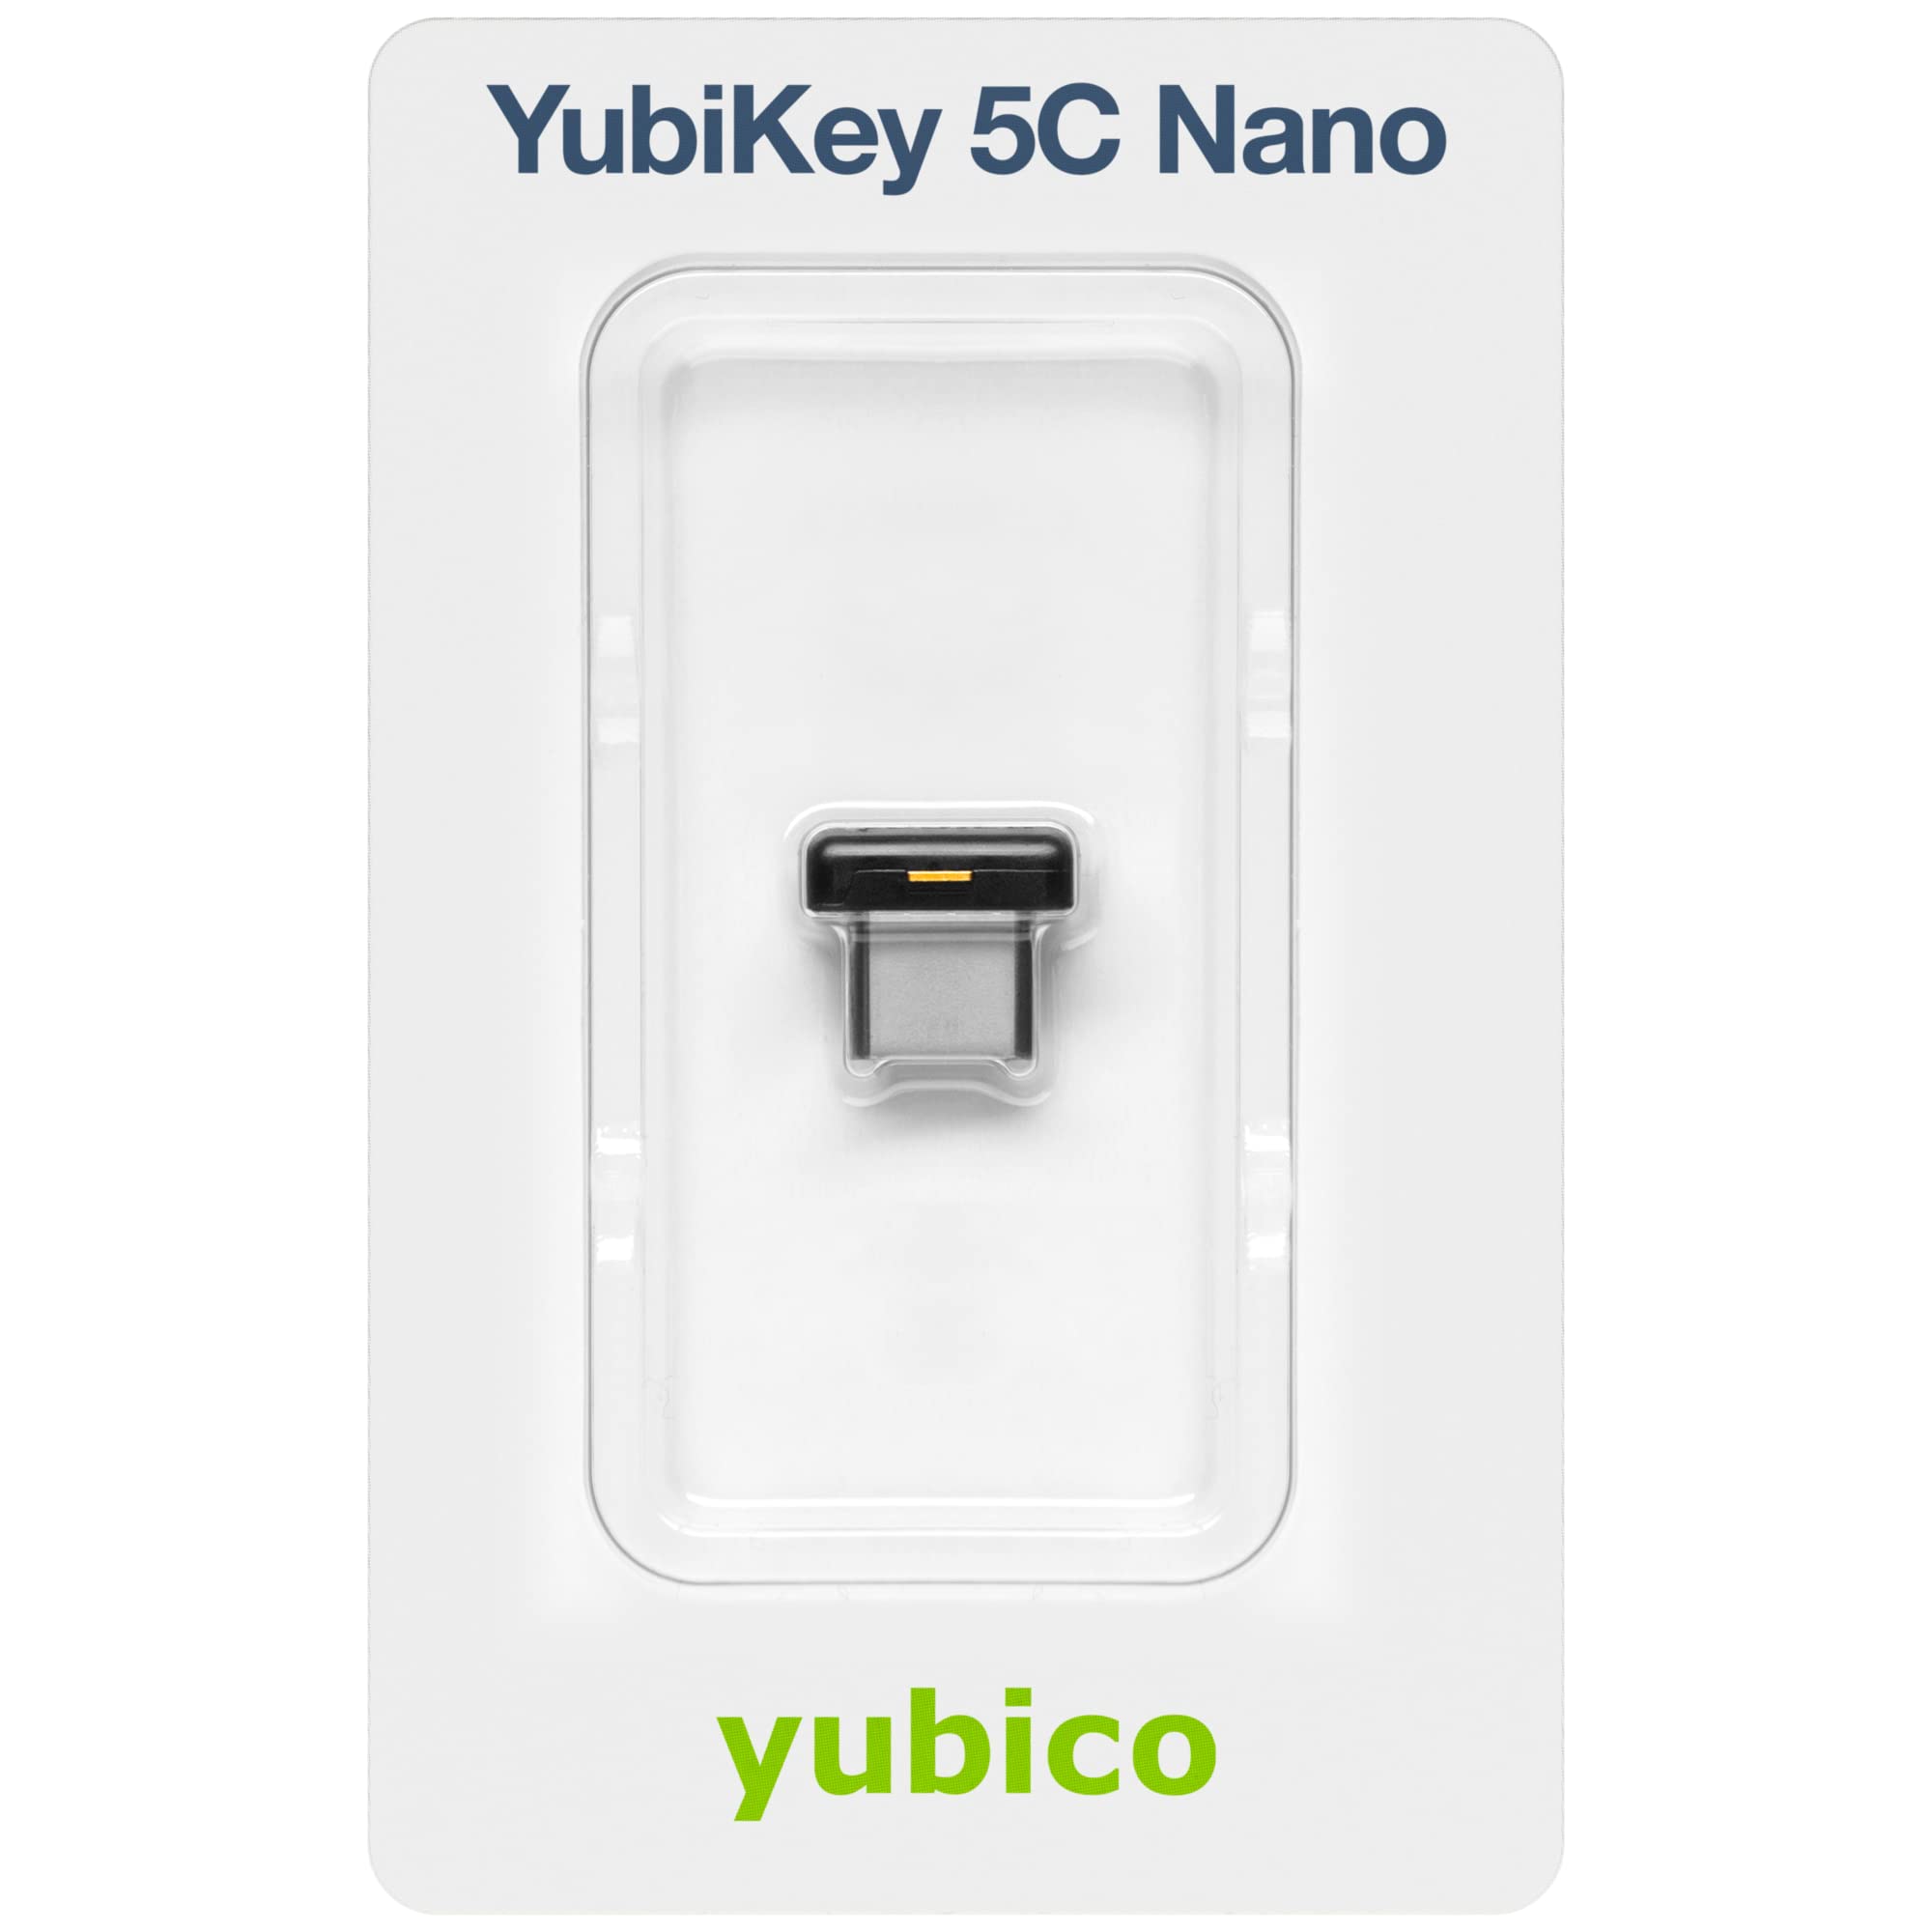 Yubico - YubiKey 5C Nano - USB-C - Full Featured, Multi-Protocol - Two Factor, Multi-Factor, and passwordless Security Key - IP68 Water and dust Tight - Designed to Stay in Port